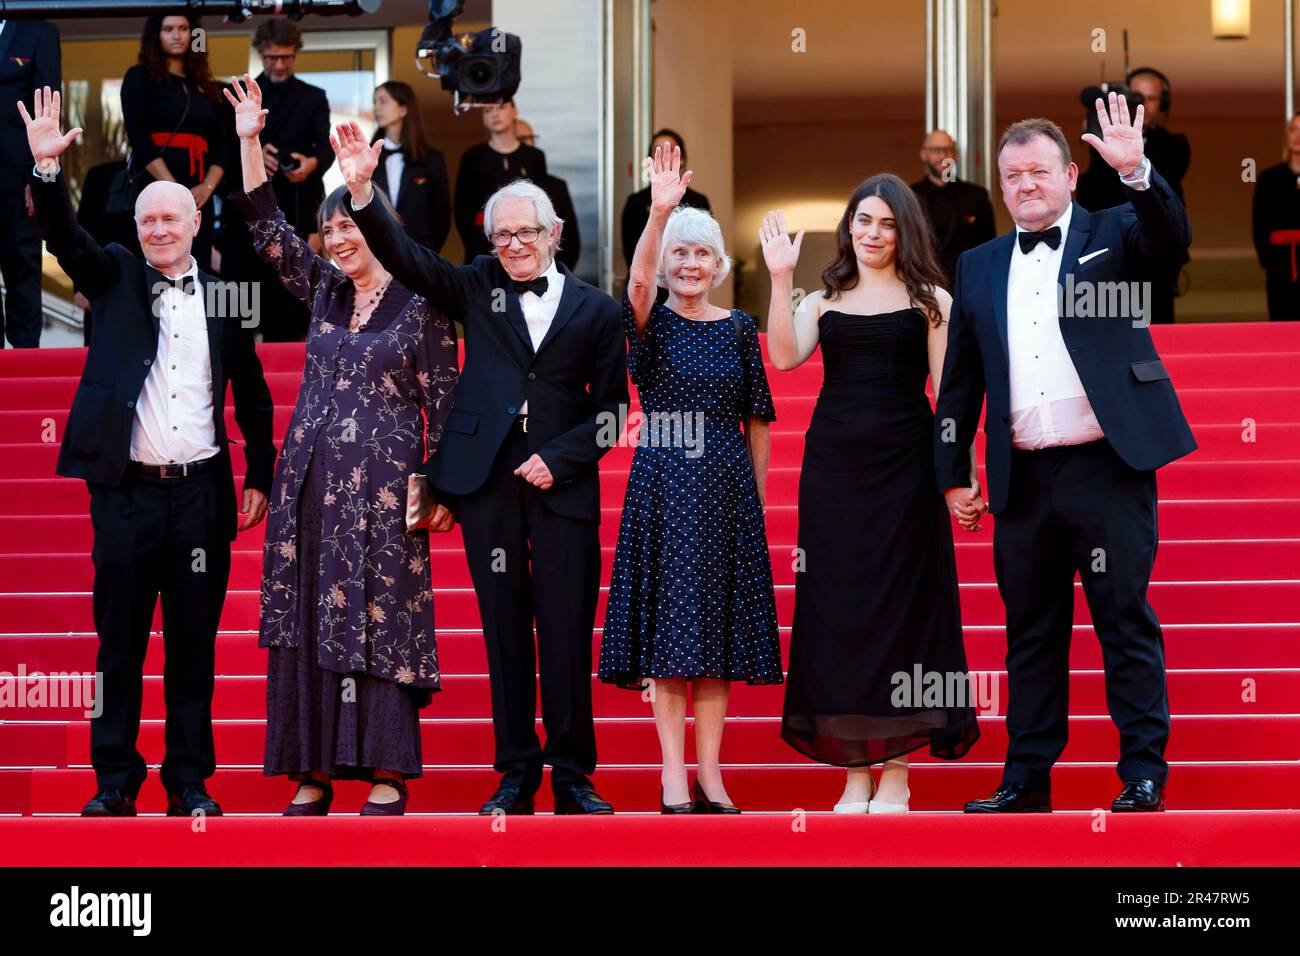 Paul Laverty, Rebecca O'Brien, Director Ken Loach, Lesley Ashton, Ebla Mari and Dave Turner attend the 'The Old Oak' premiere during the 76th Cannes Film Festival at Palais des Festivals in Cannes, France, on 26 May 2023. Credit: dpa picture alliance/Alamy Live News Stock Photo